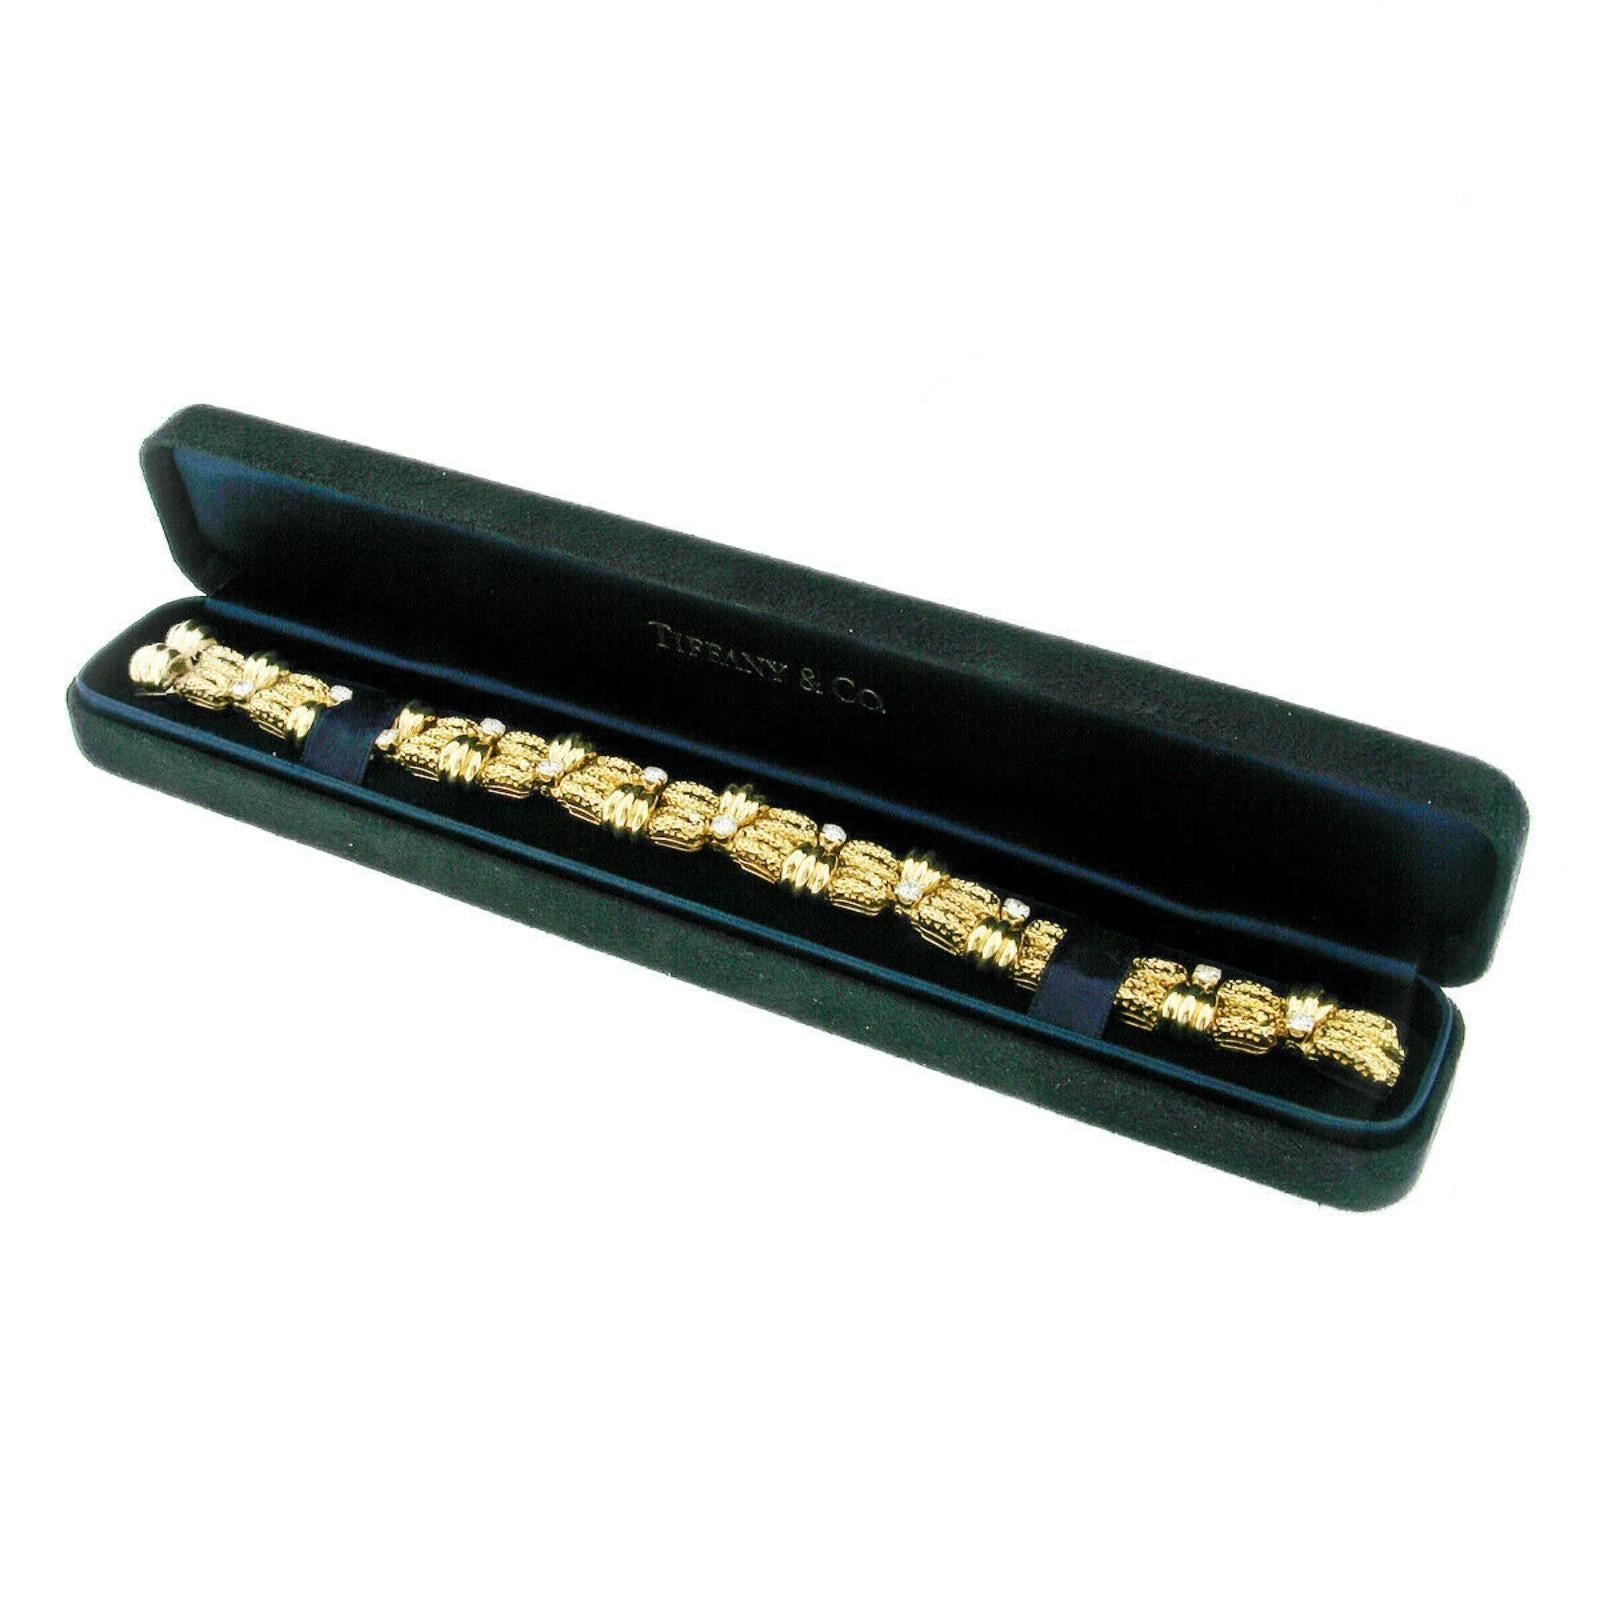 You are looking at an absolutely magnificent and uniquely designed vintage Tiffany & Co. bracelet hand crafted in solid 18k yellow gold. The bracelet was neatly hand assembled and further drenched with the finest quality diamonds throughout. The